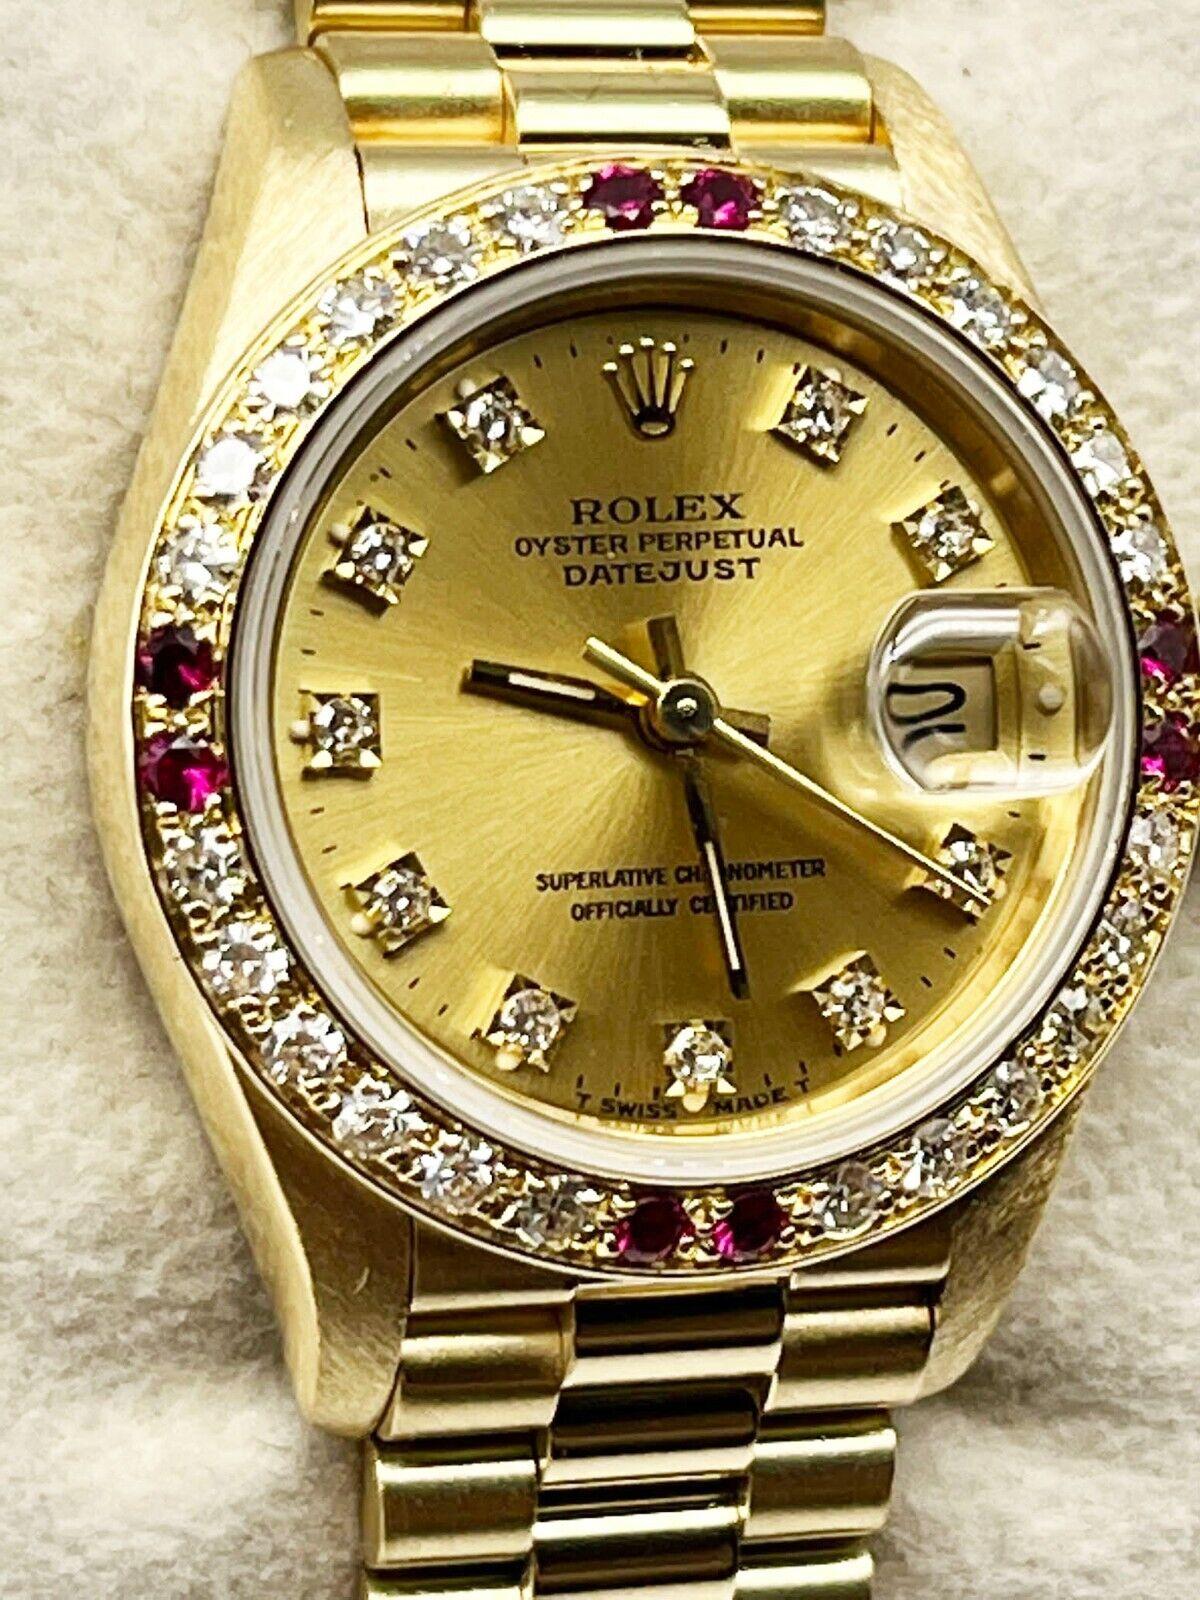 Style Number: 69178

Serial: E841***

Year: 1990

Model: Datejust

Case Material: 18K Yellow Gold

Band: 18K Yellow Gold 

Bezel: Custom Diamond and Ruby bezel

Dial: Custom Diamond dial

Face: Sapphire Crystal

Case Size: 26mm

Includes: 

-Elegant